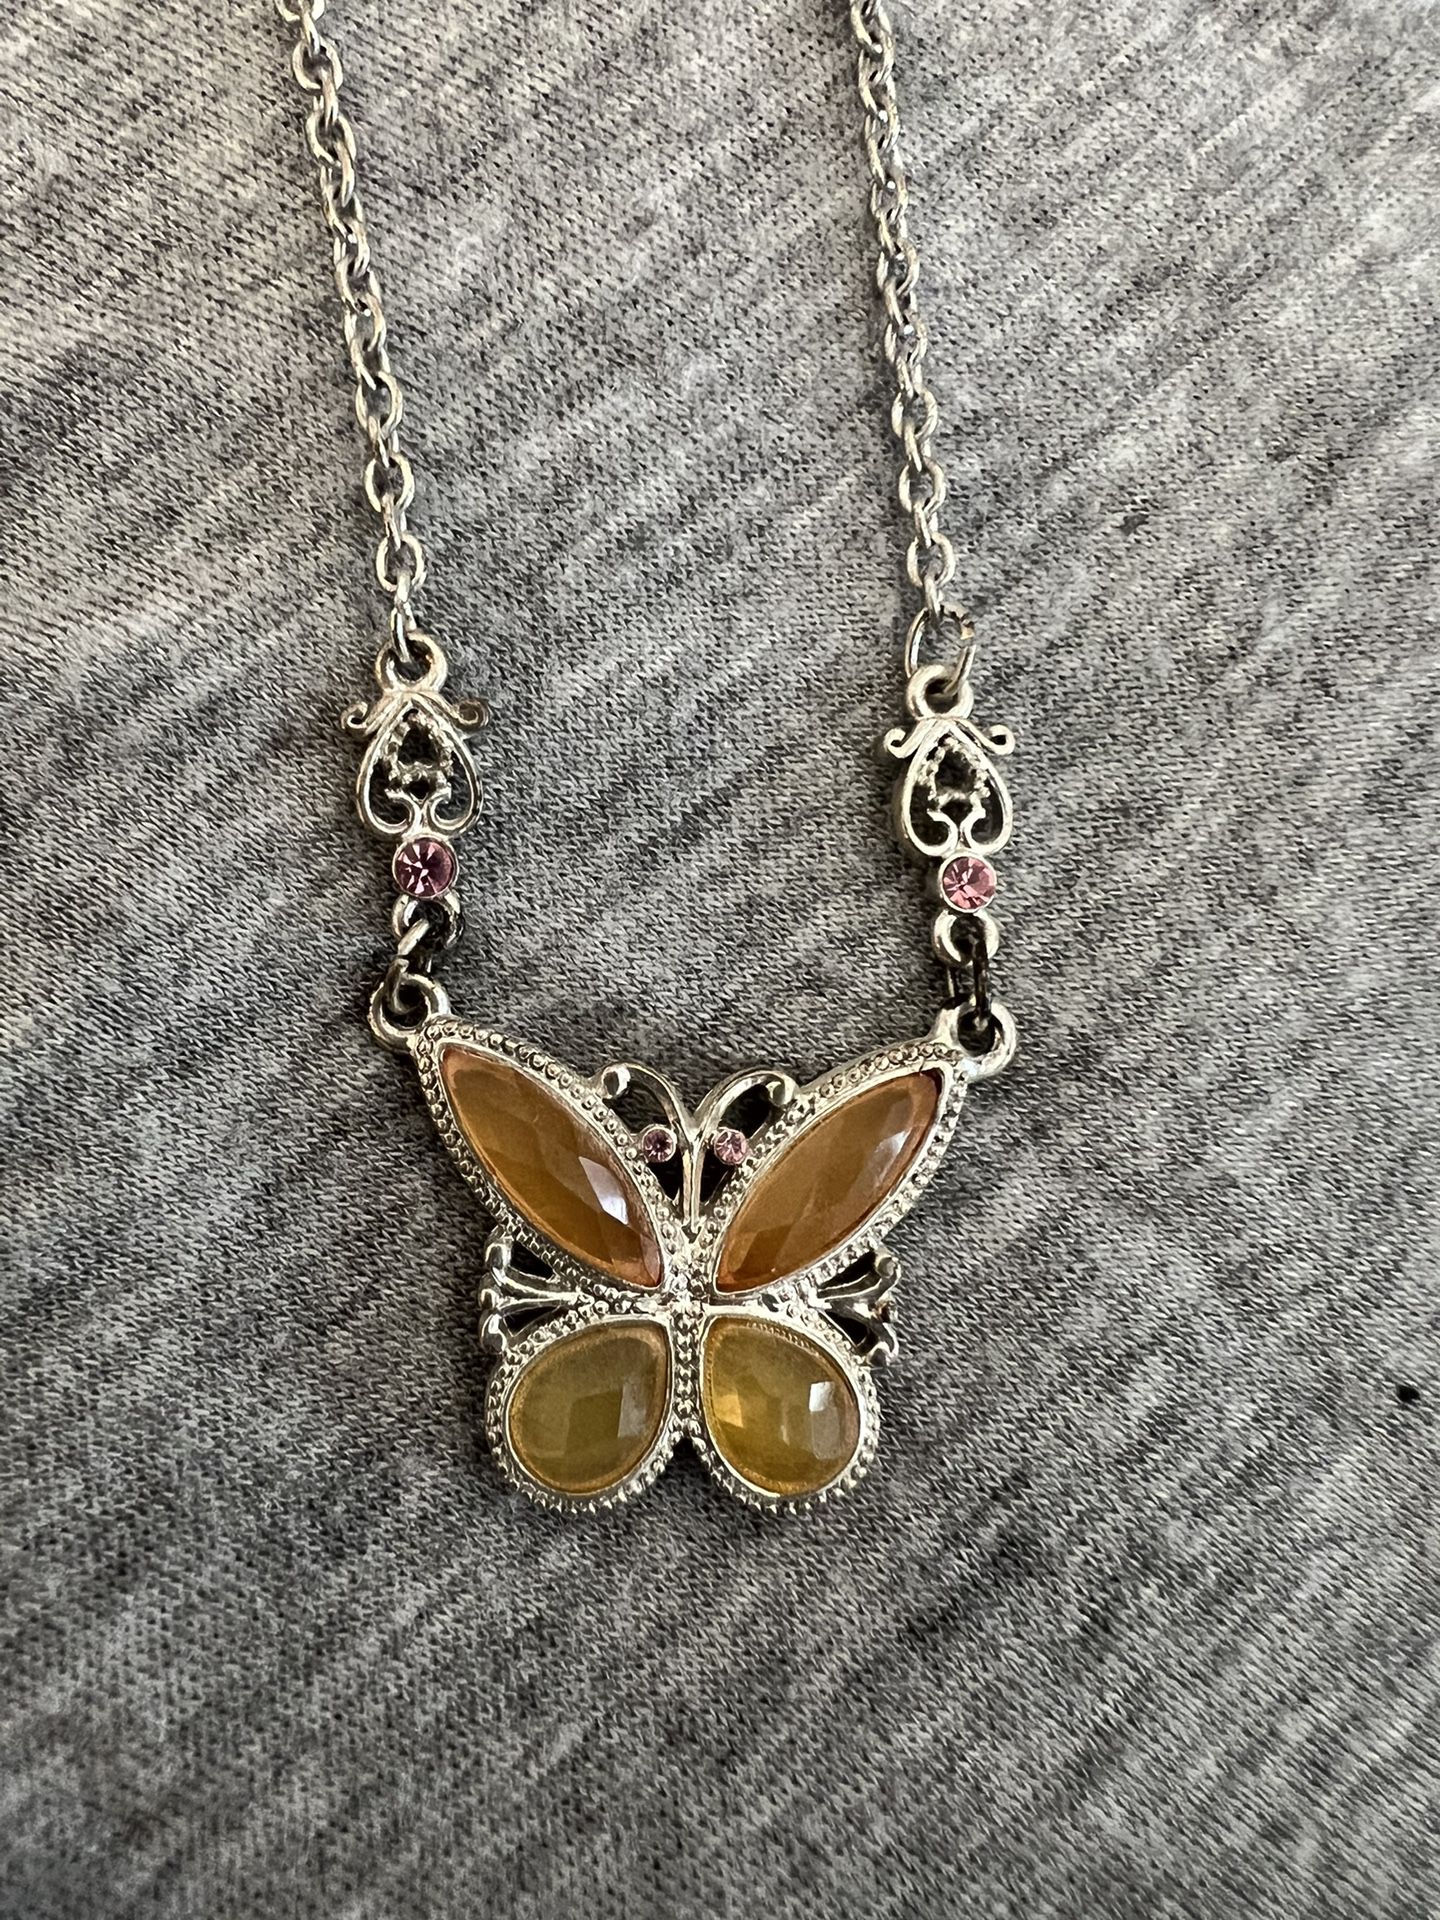 Butterfly Necklace 1928 Vintage Necklace In Amber 